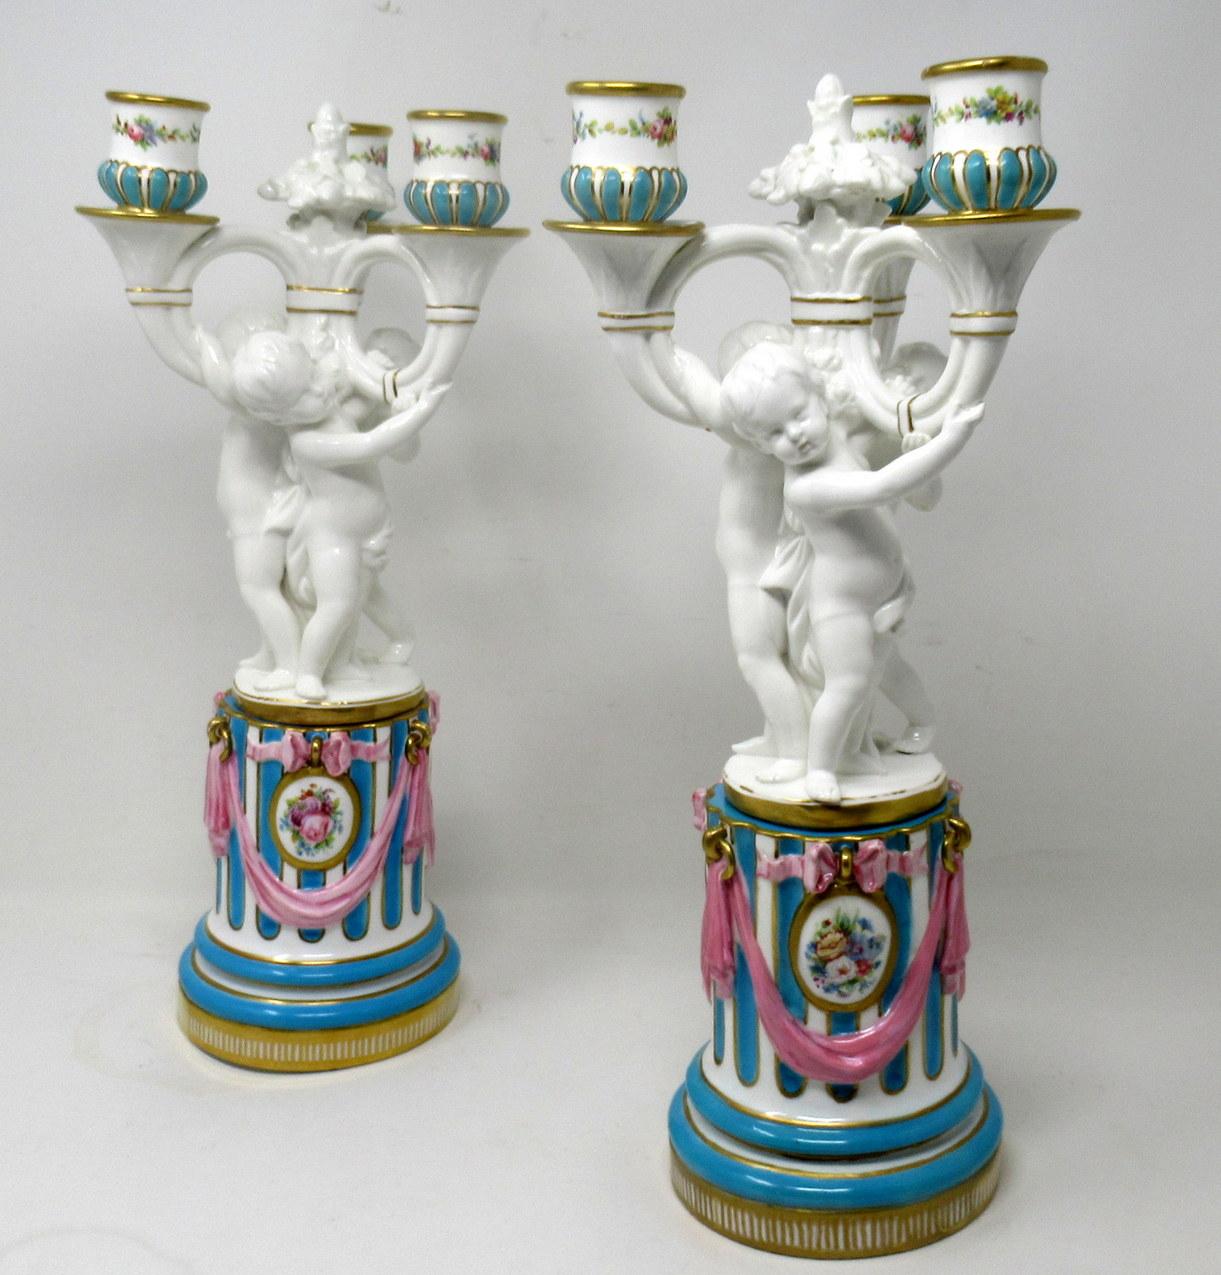 Stunning example of a pair of English Minton porcelain three branch candelabra, each modelled as a group of Cherubs standing on naturalistic base above an elaborate reeded socle with lavish decoration depicting gilt framed medallions with hand